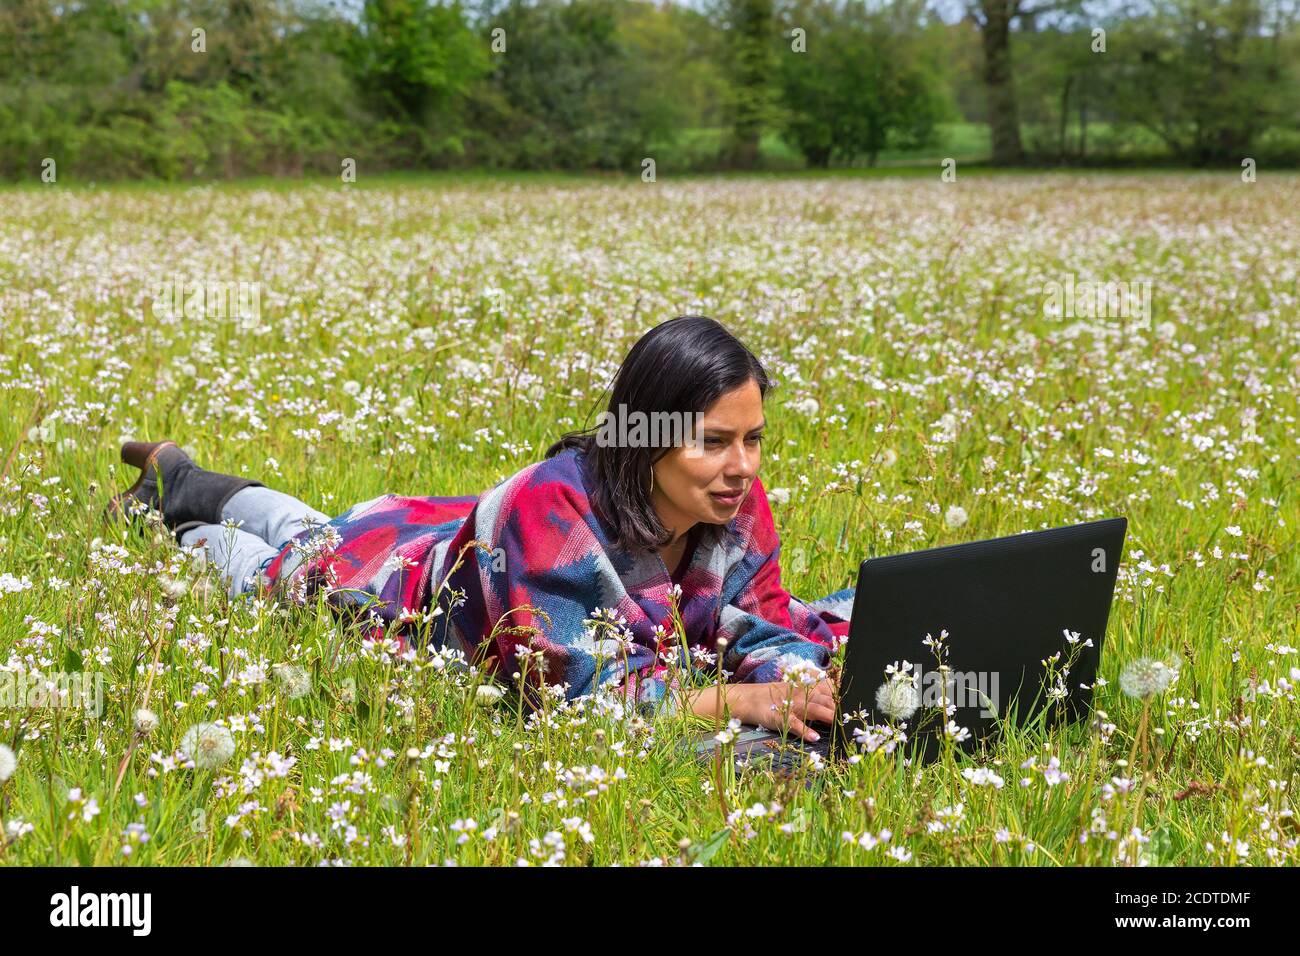 Woman lying in field of flowers with  computer Stock Photo